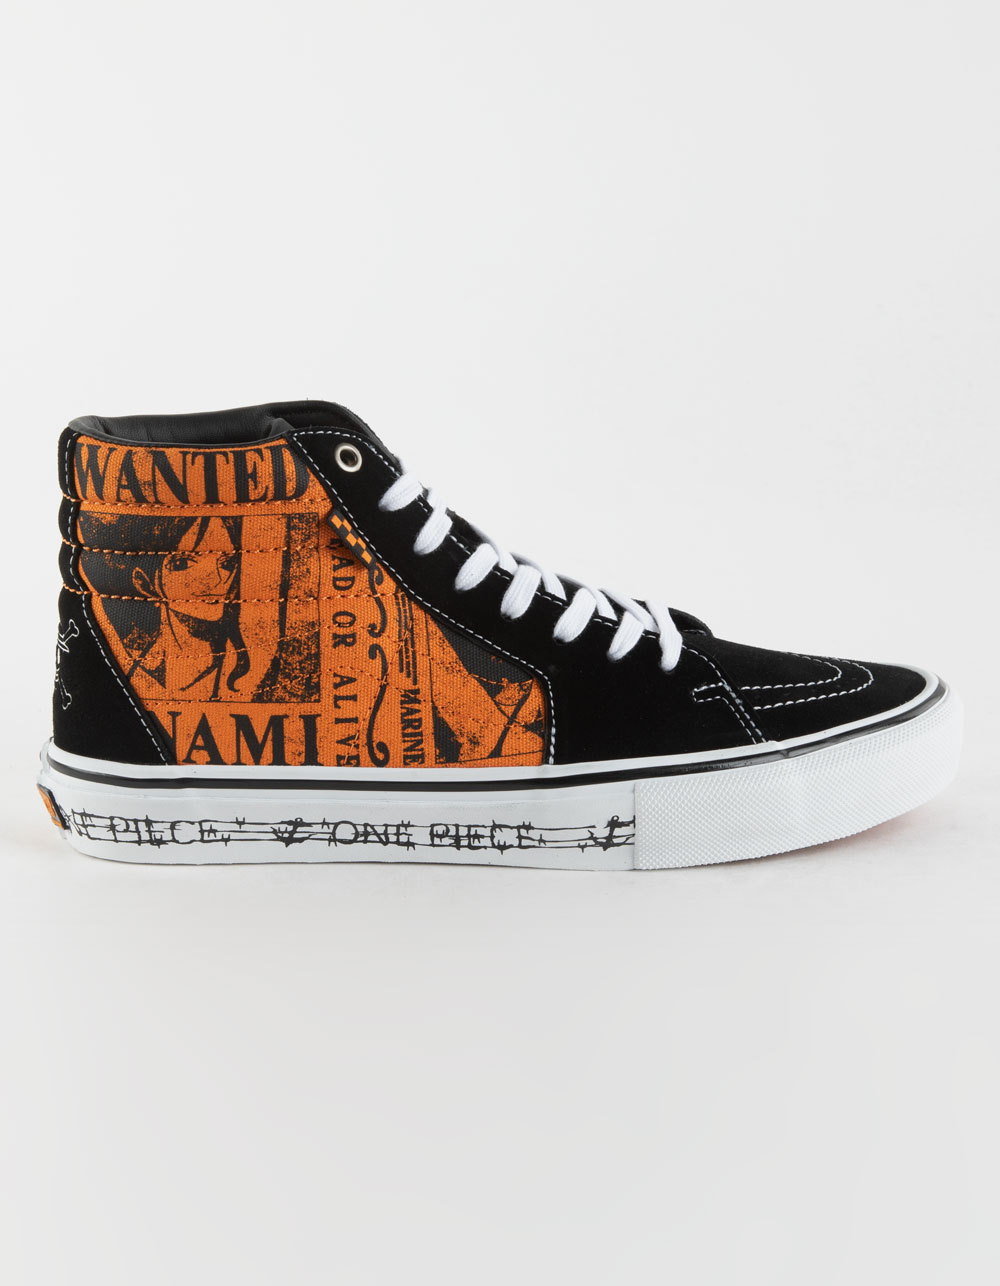 One Piece x Vans collab launching in the Philippines soon